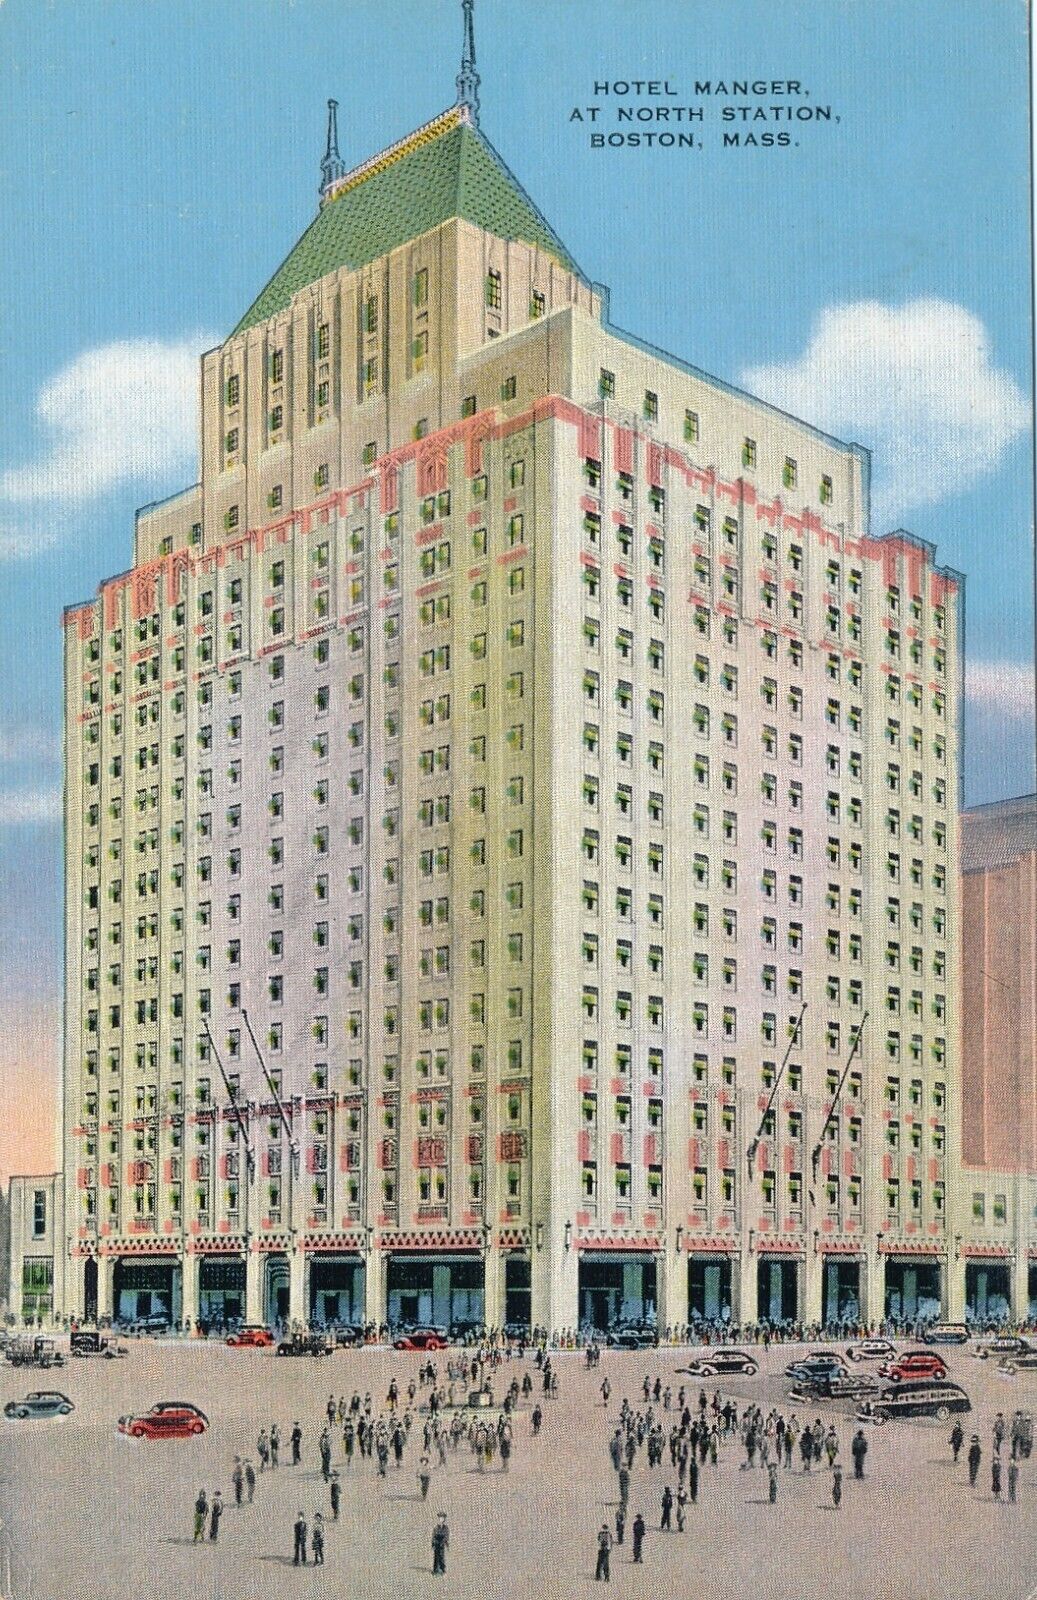 Hotel Manger at North Station in Boston, MA 1941 posted vintage postcard